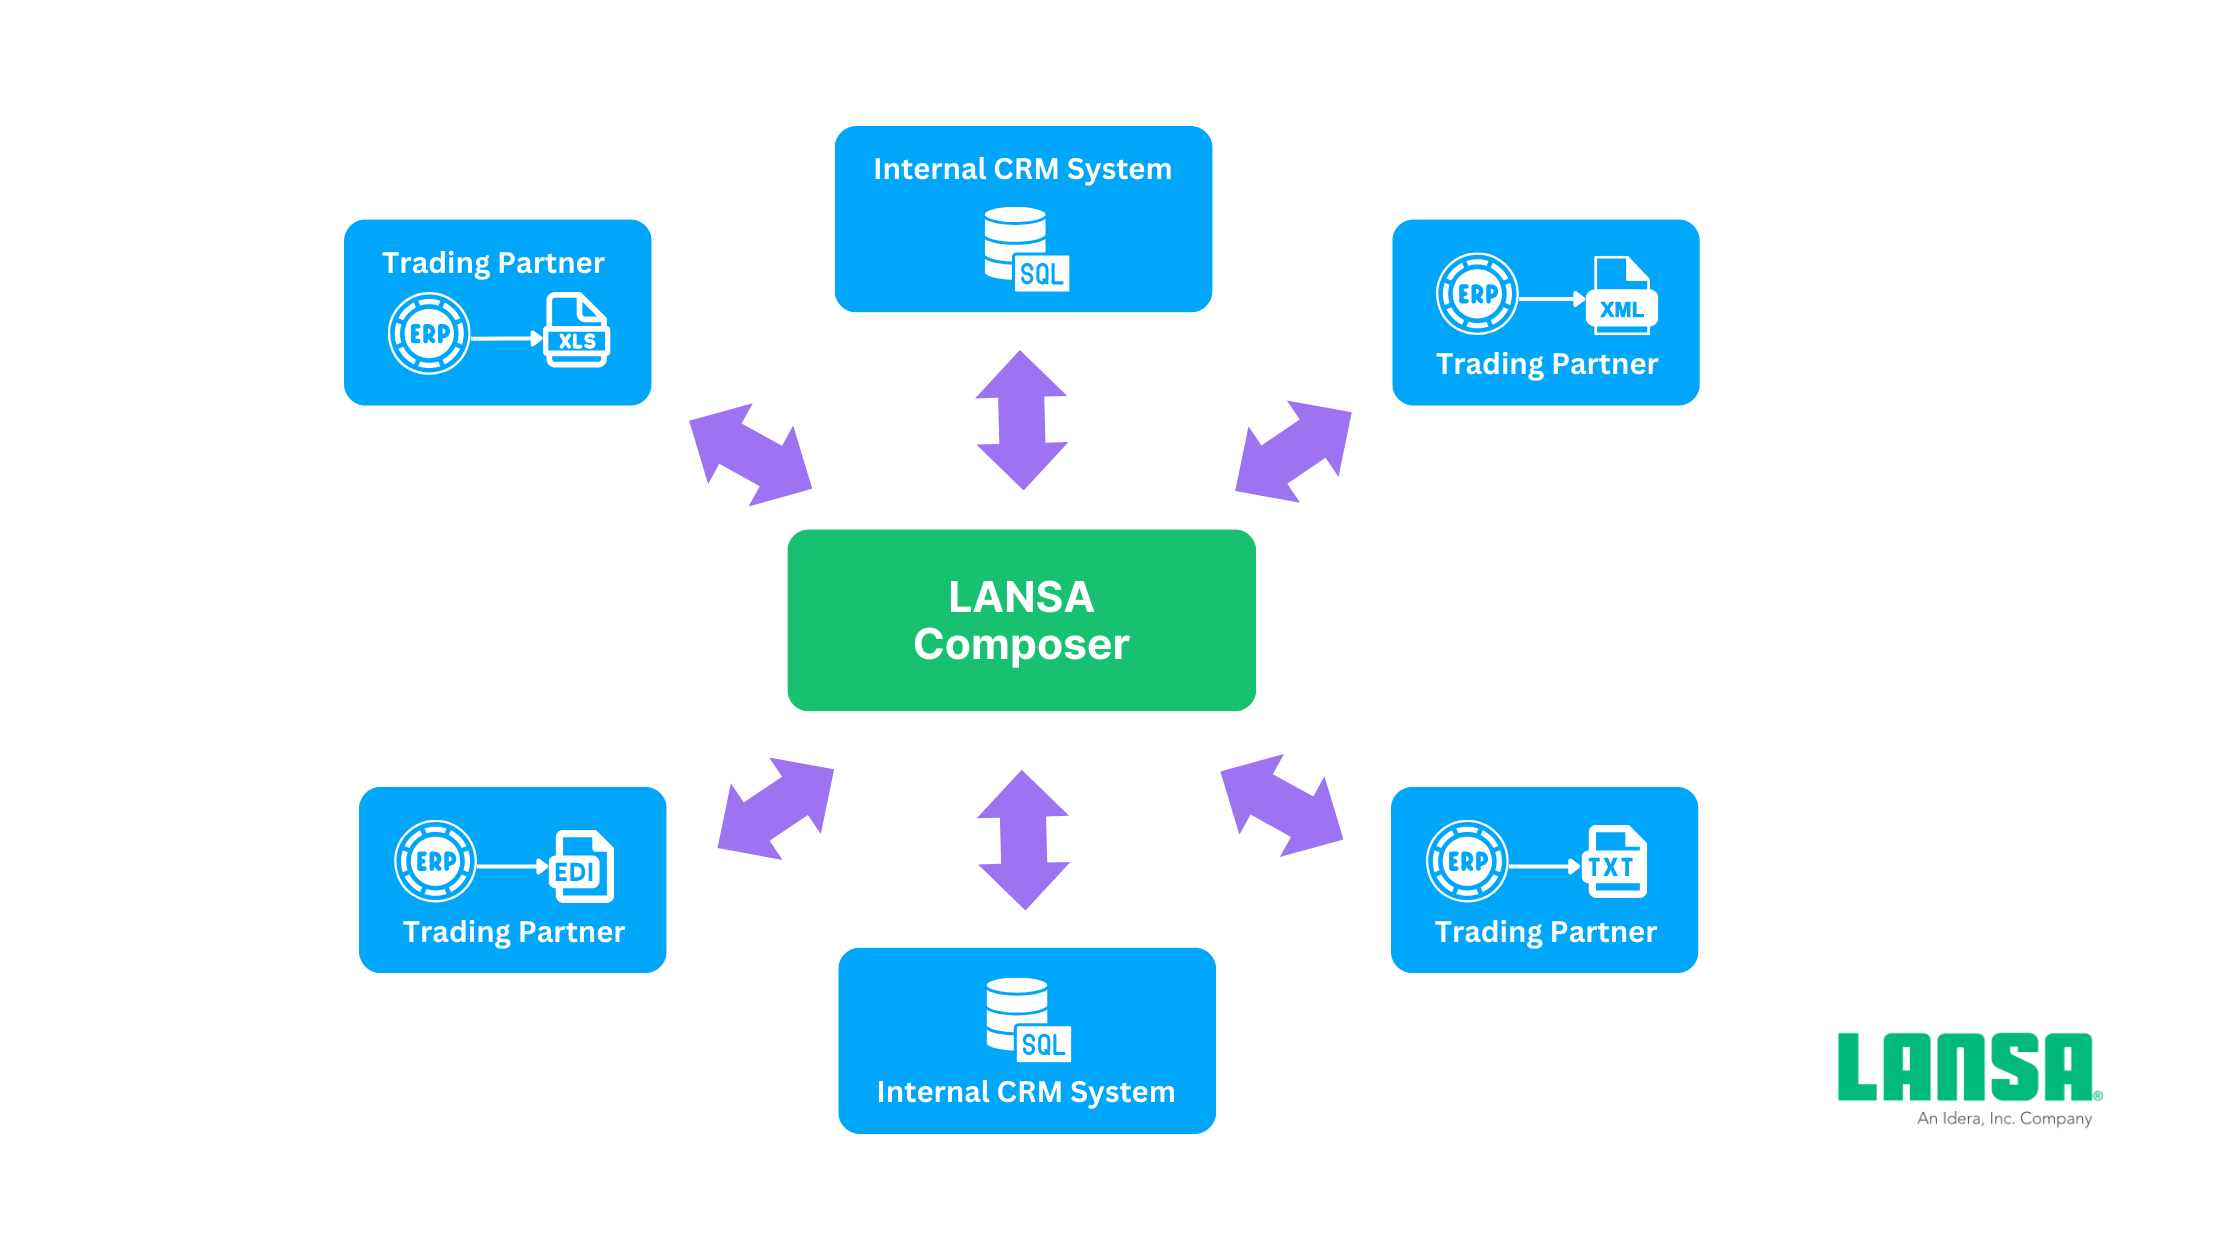 LANSA Composer supports multiple data sources